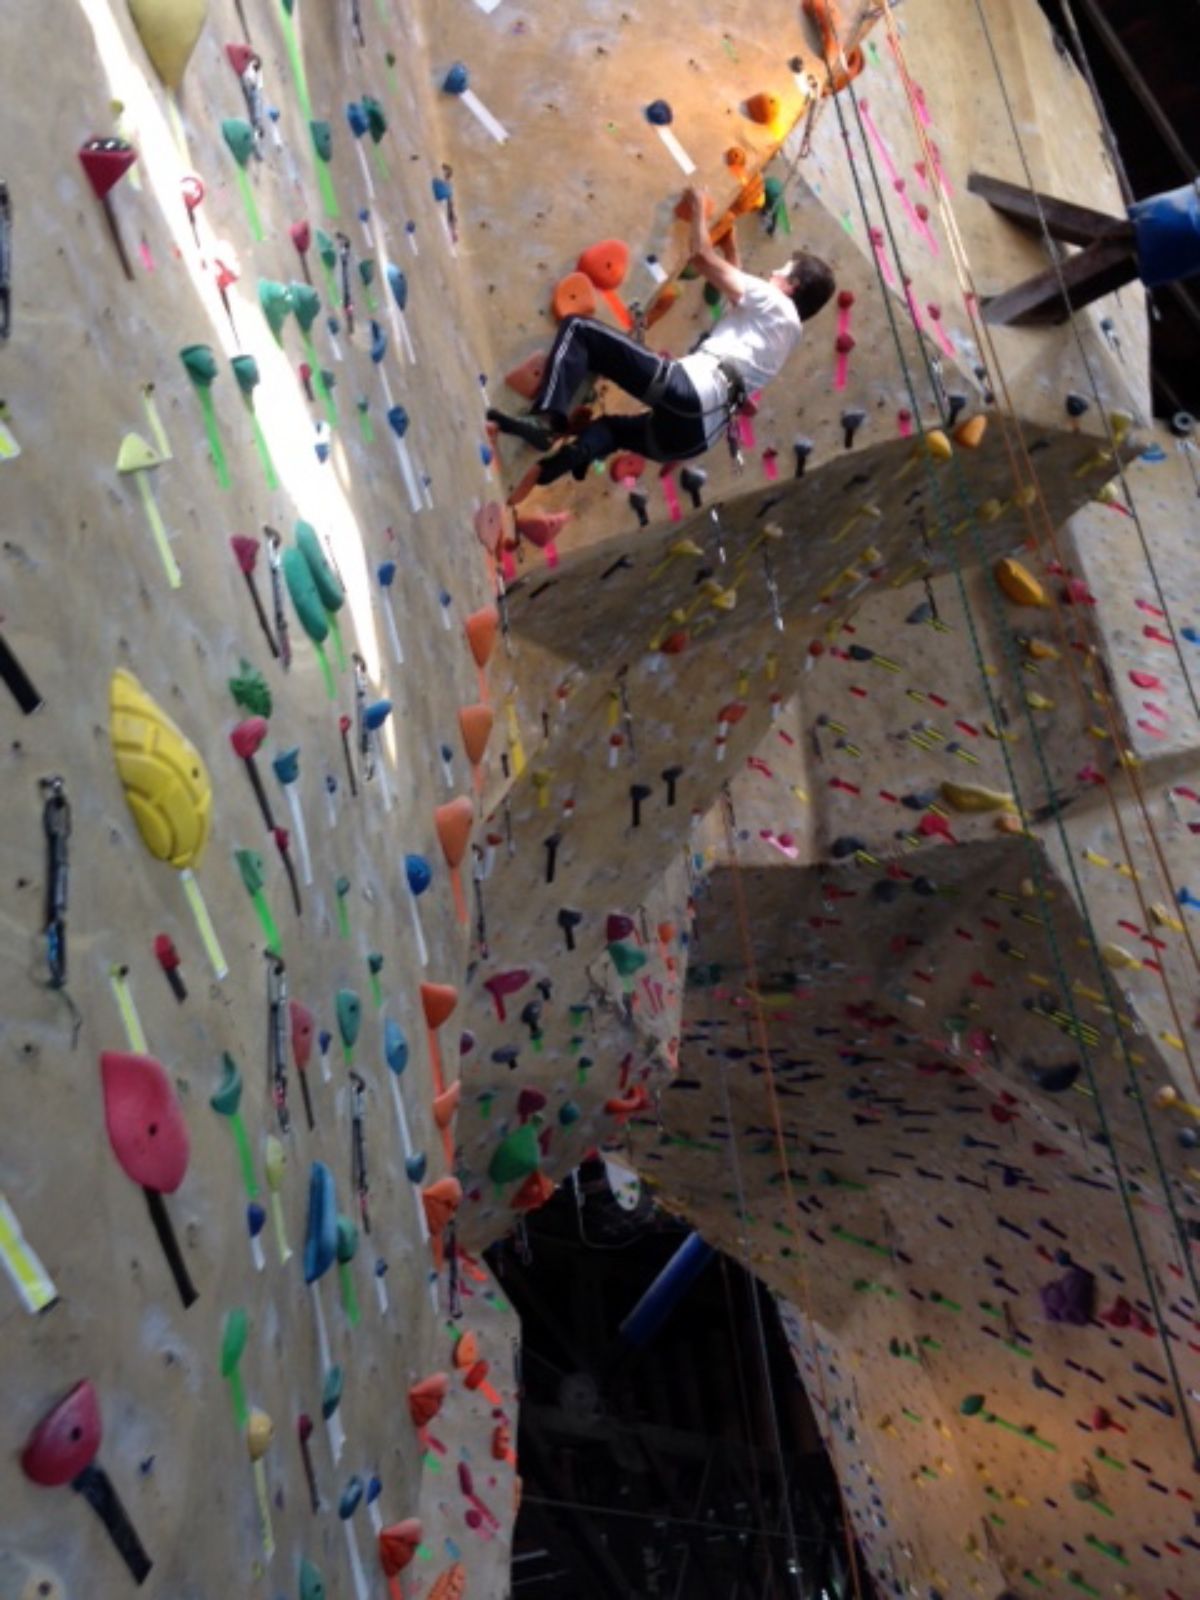 the author training at her local climbing gym